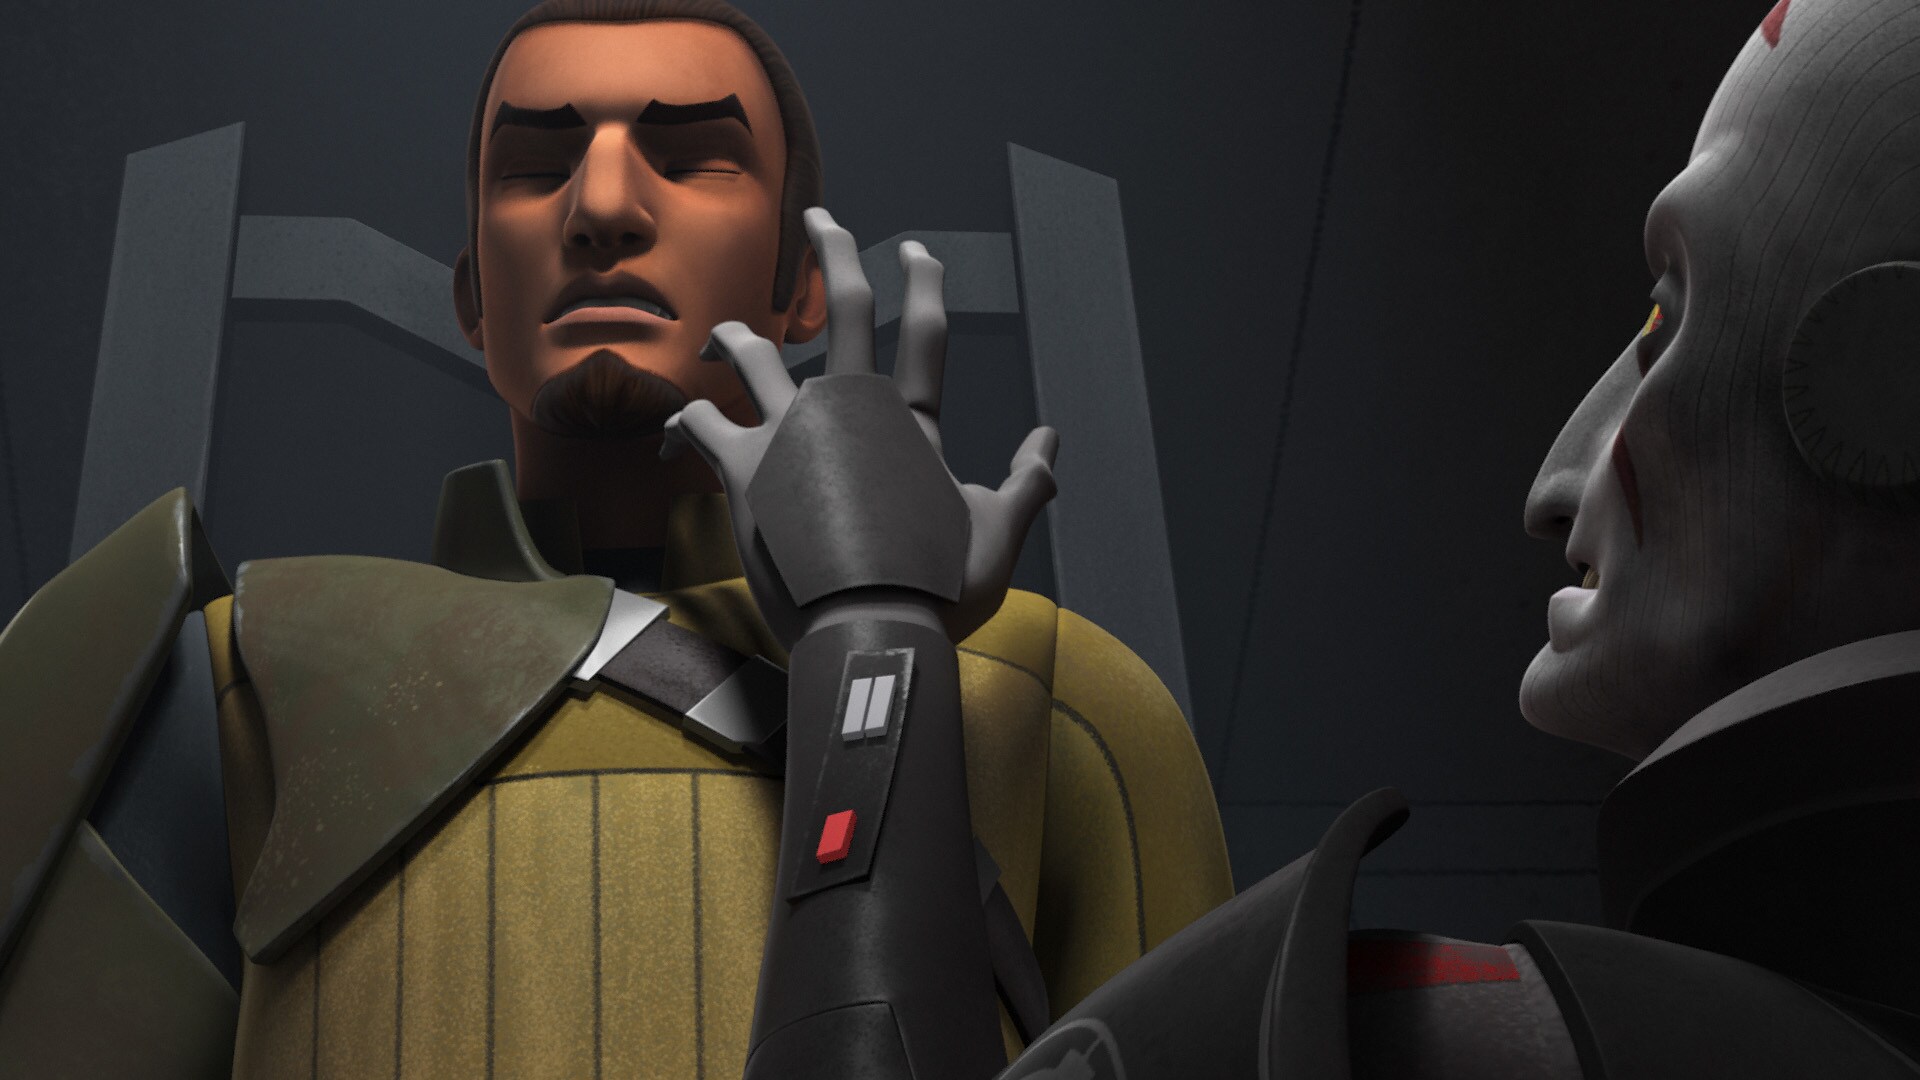 Meanwhile, Kanan suffers at the hands of the Inquisitor and Grand Moff Tarkin. He somehow resists...